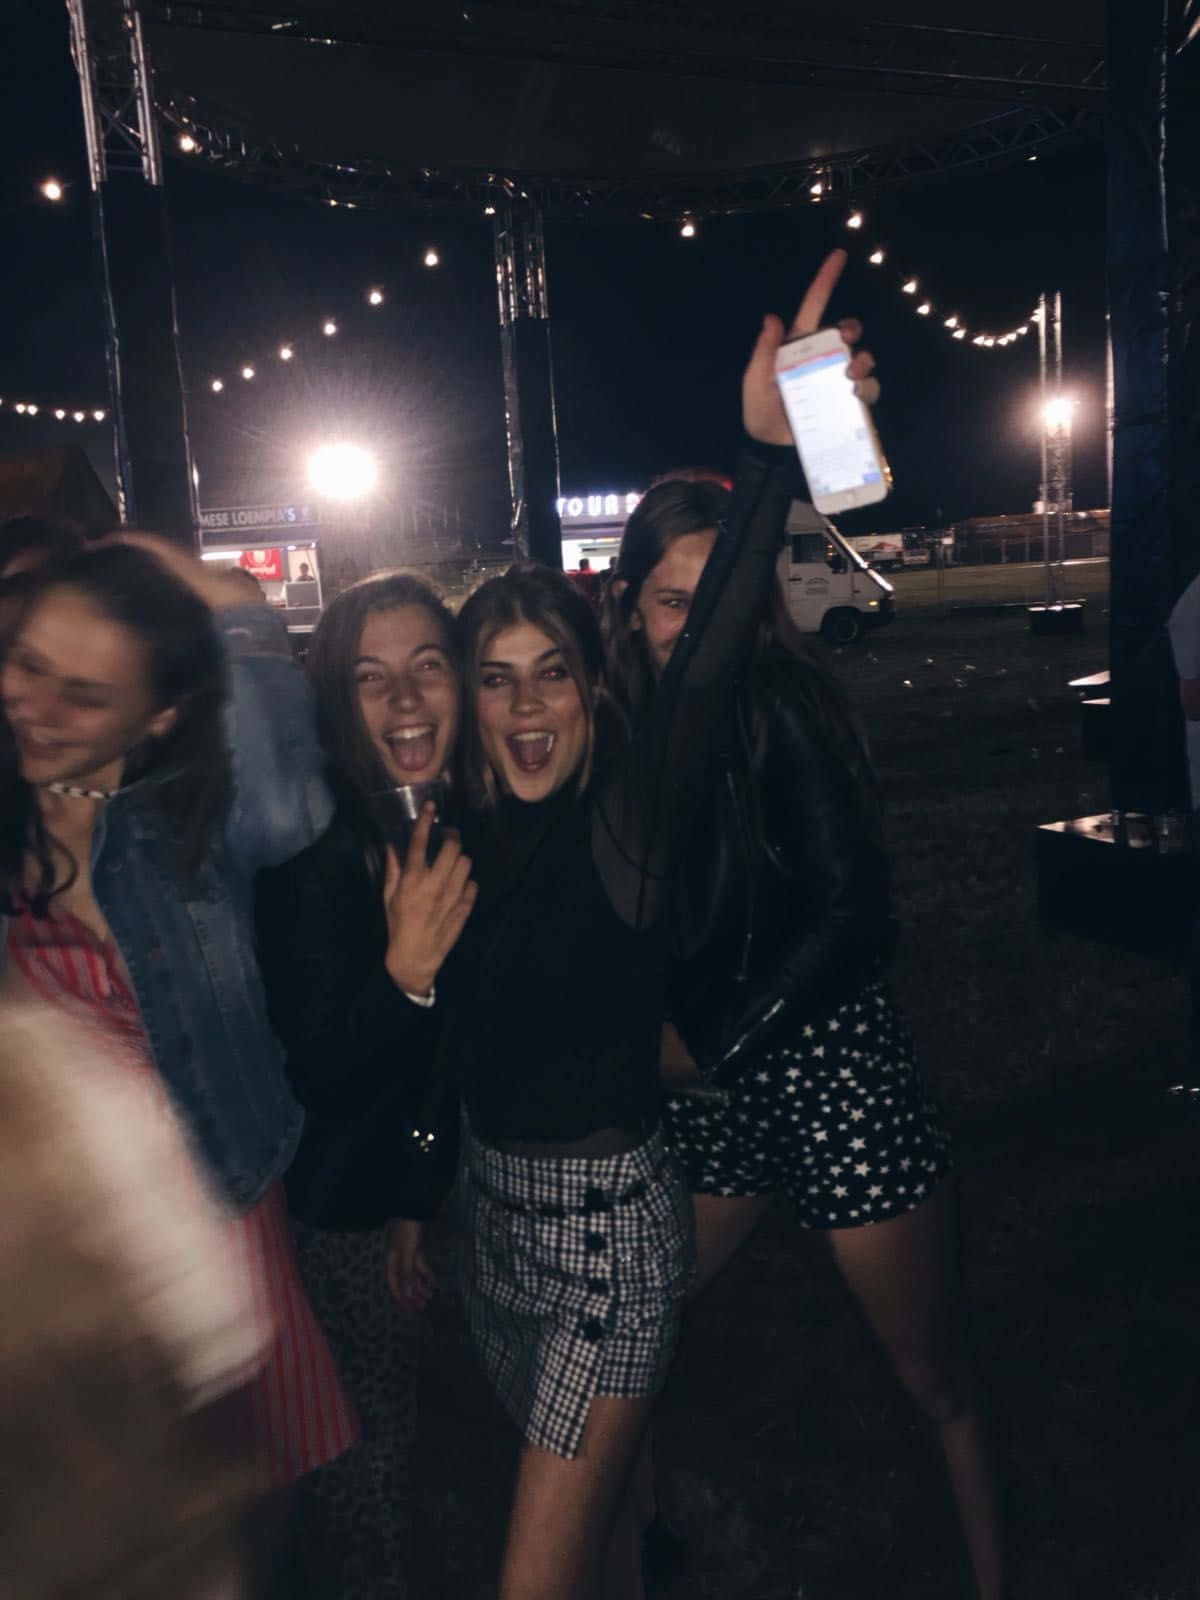 A Group Of Girls At A Festival